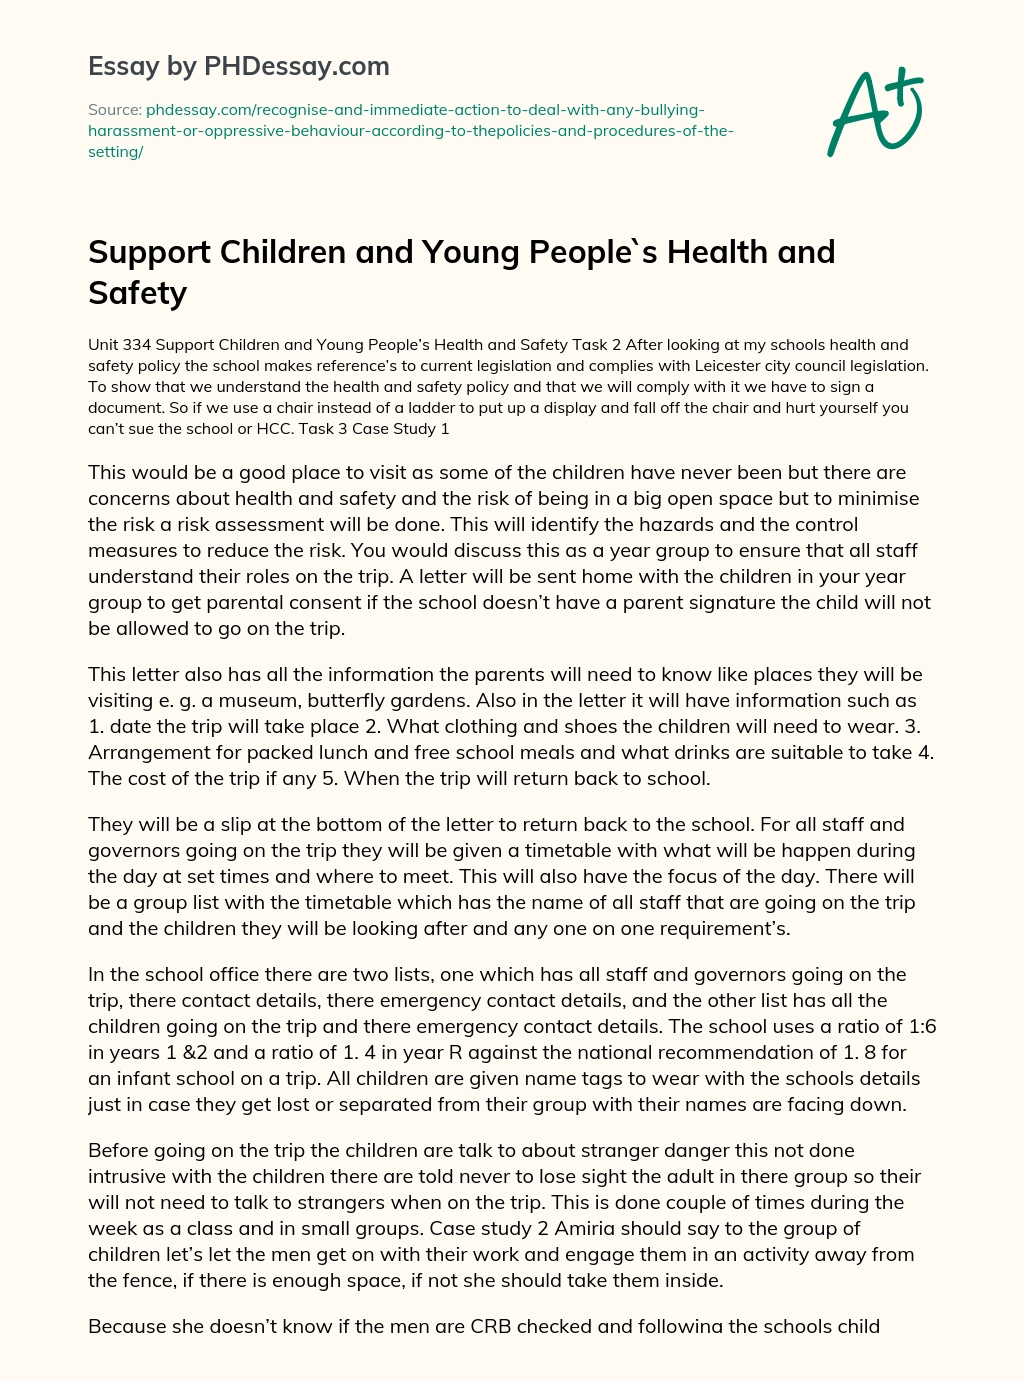 Support Children and Young People`s Health and Safety essay